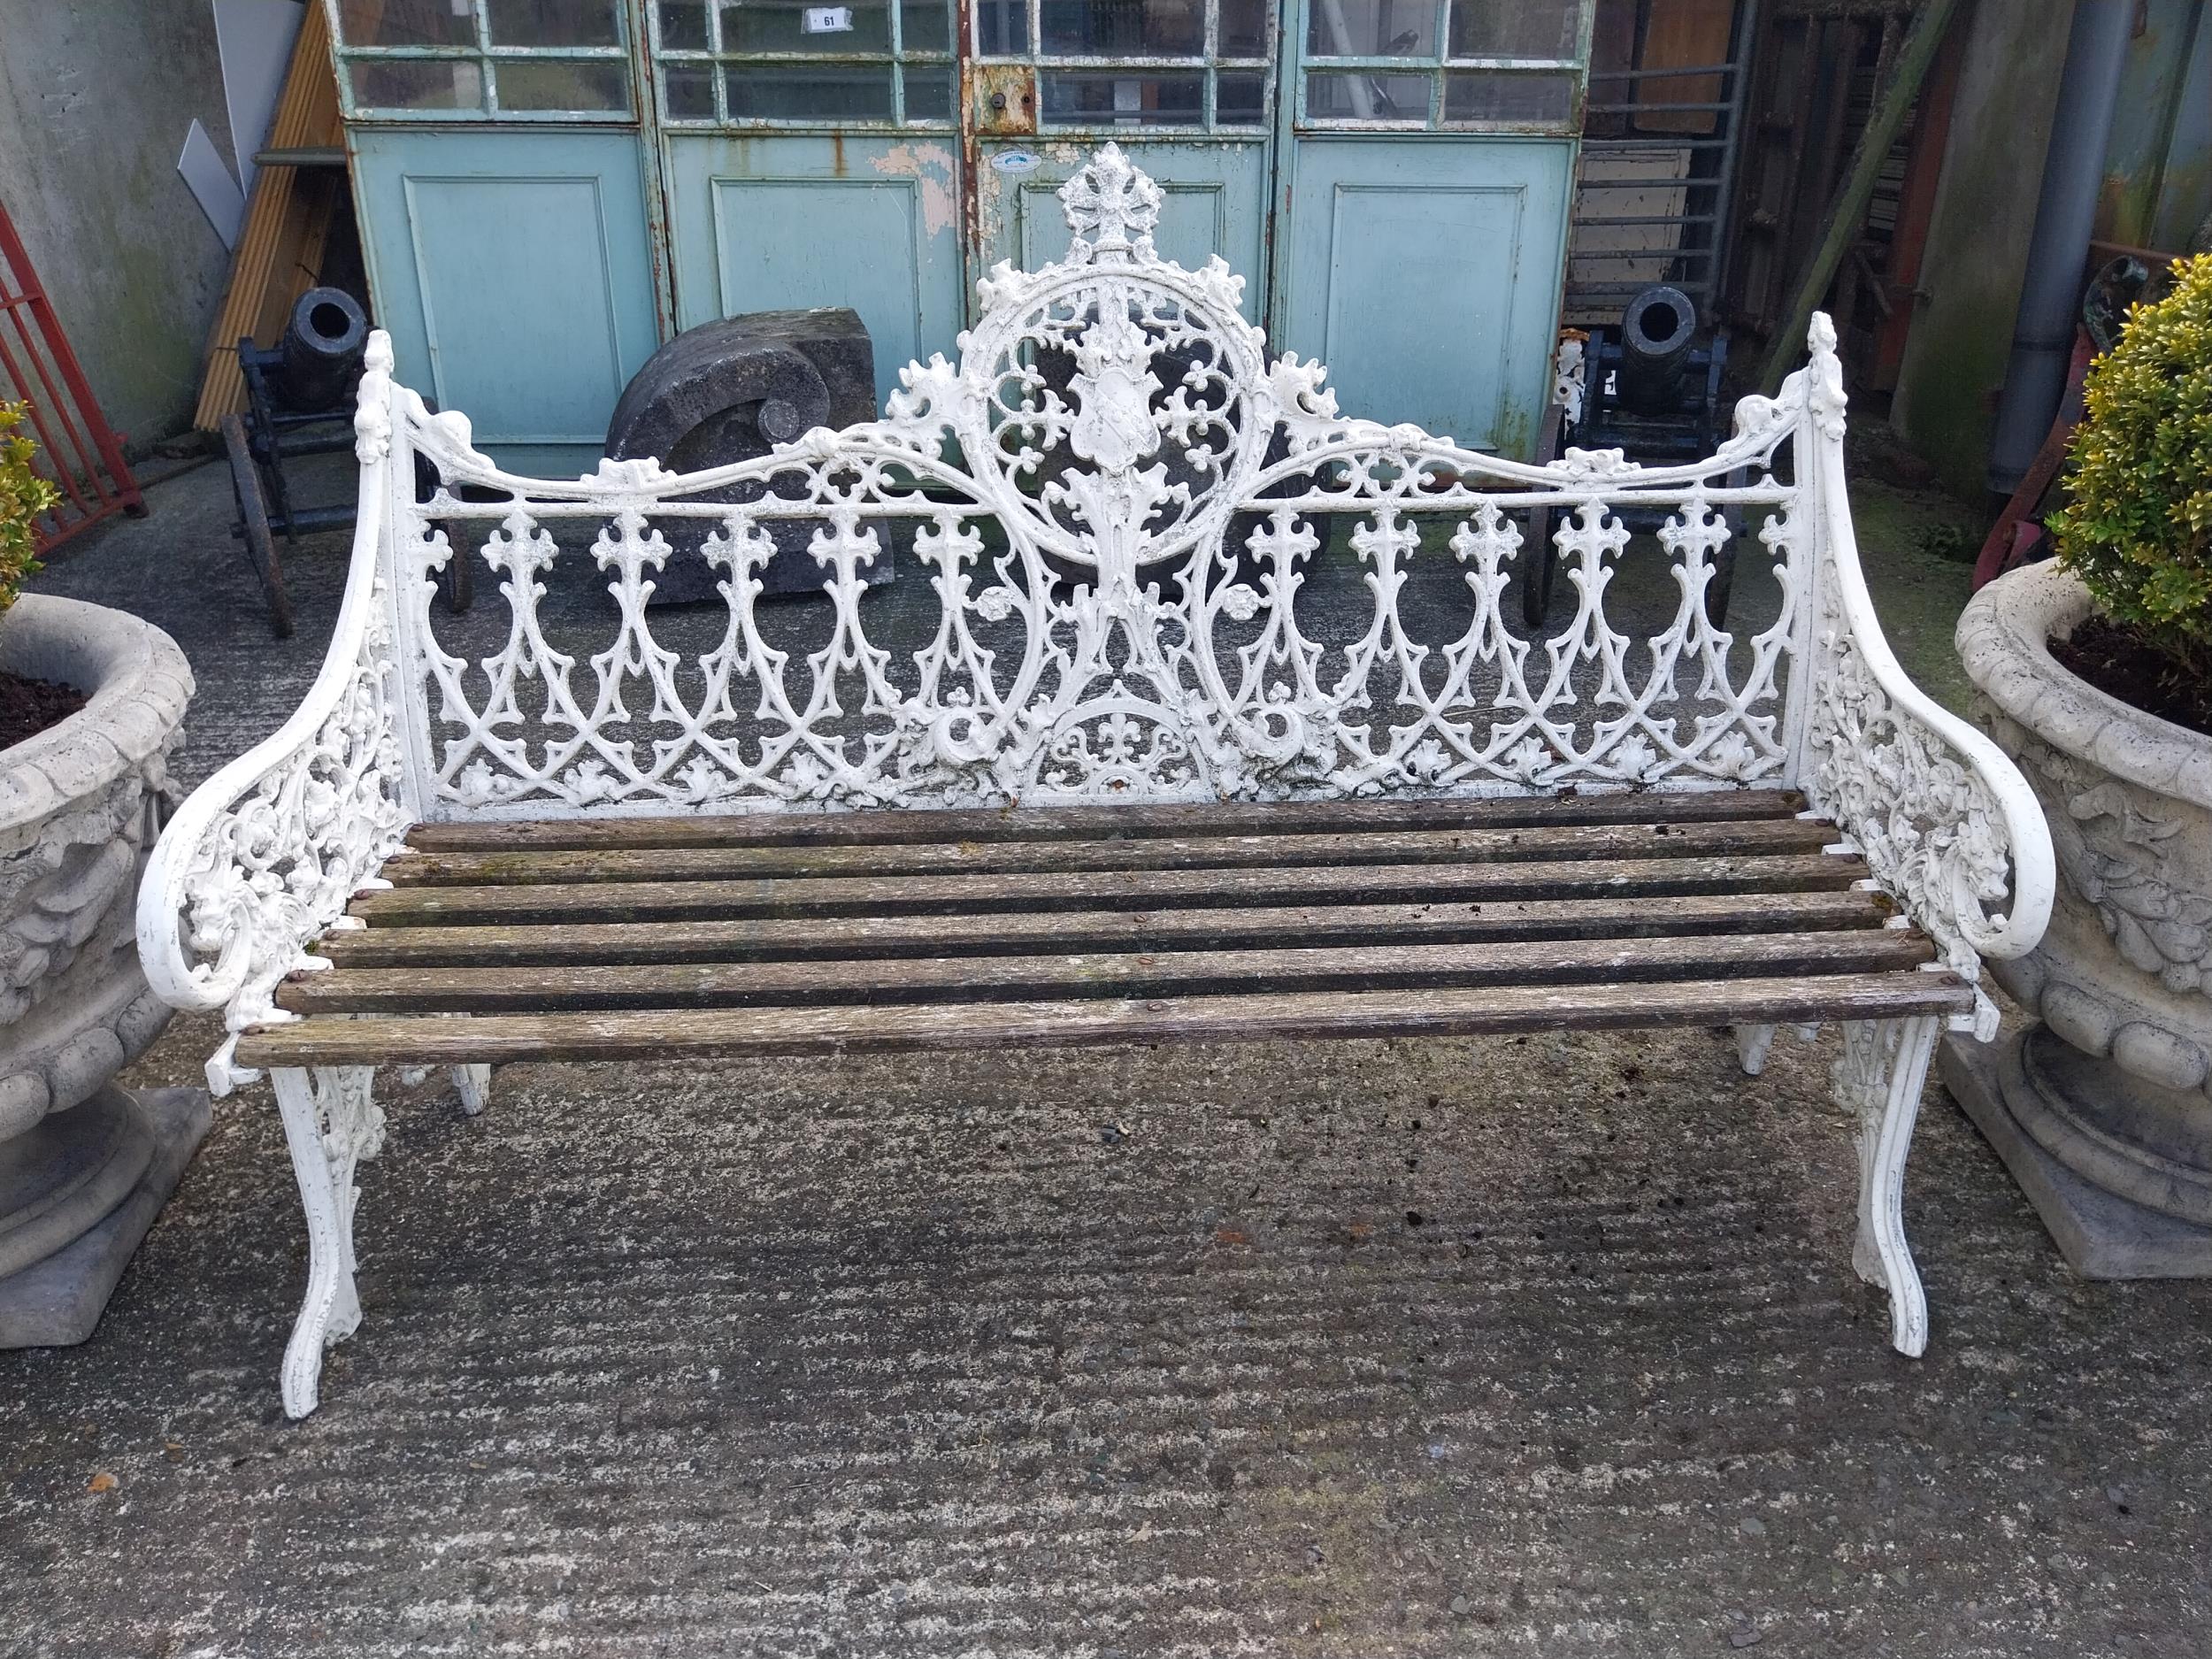 Decorative cast alloy garden bench in the Victorian style {99 cm H x 150 cm W x 68 cm D}. - Image 2 of 8